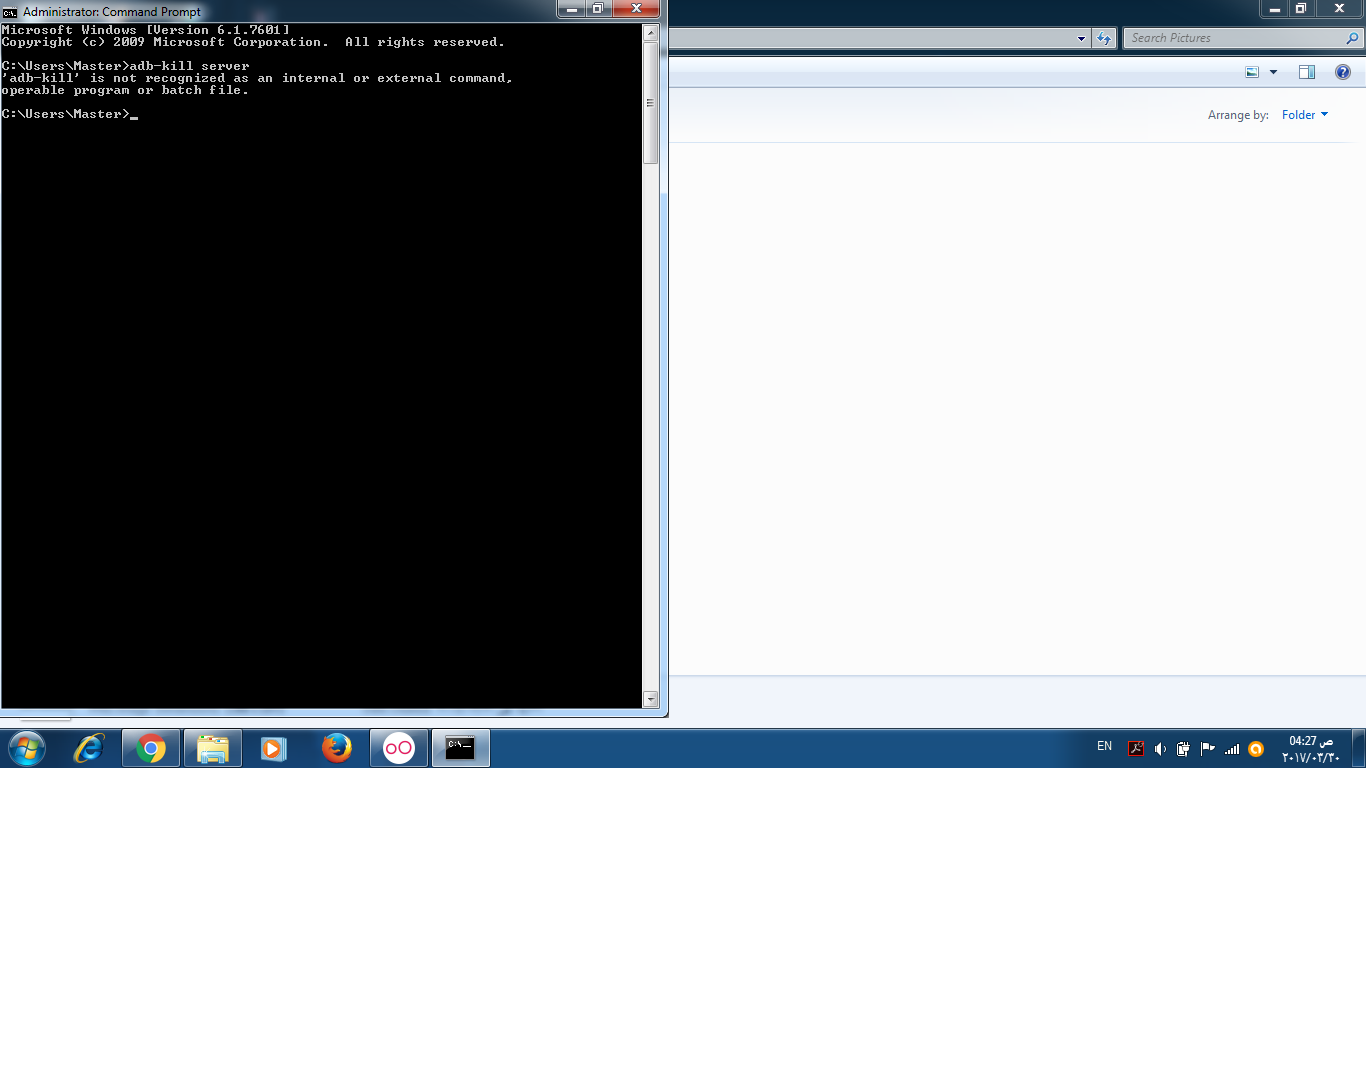 Open Command Prompt as an administrator.
Type "adb kill-server" and press enter.